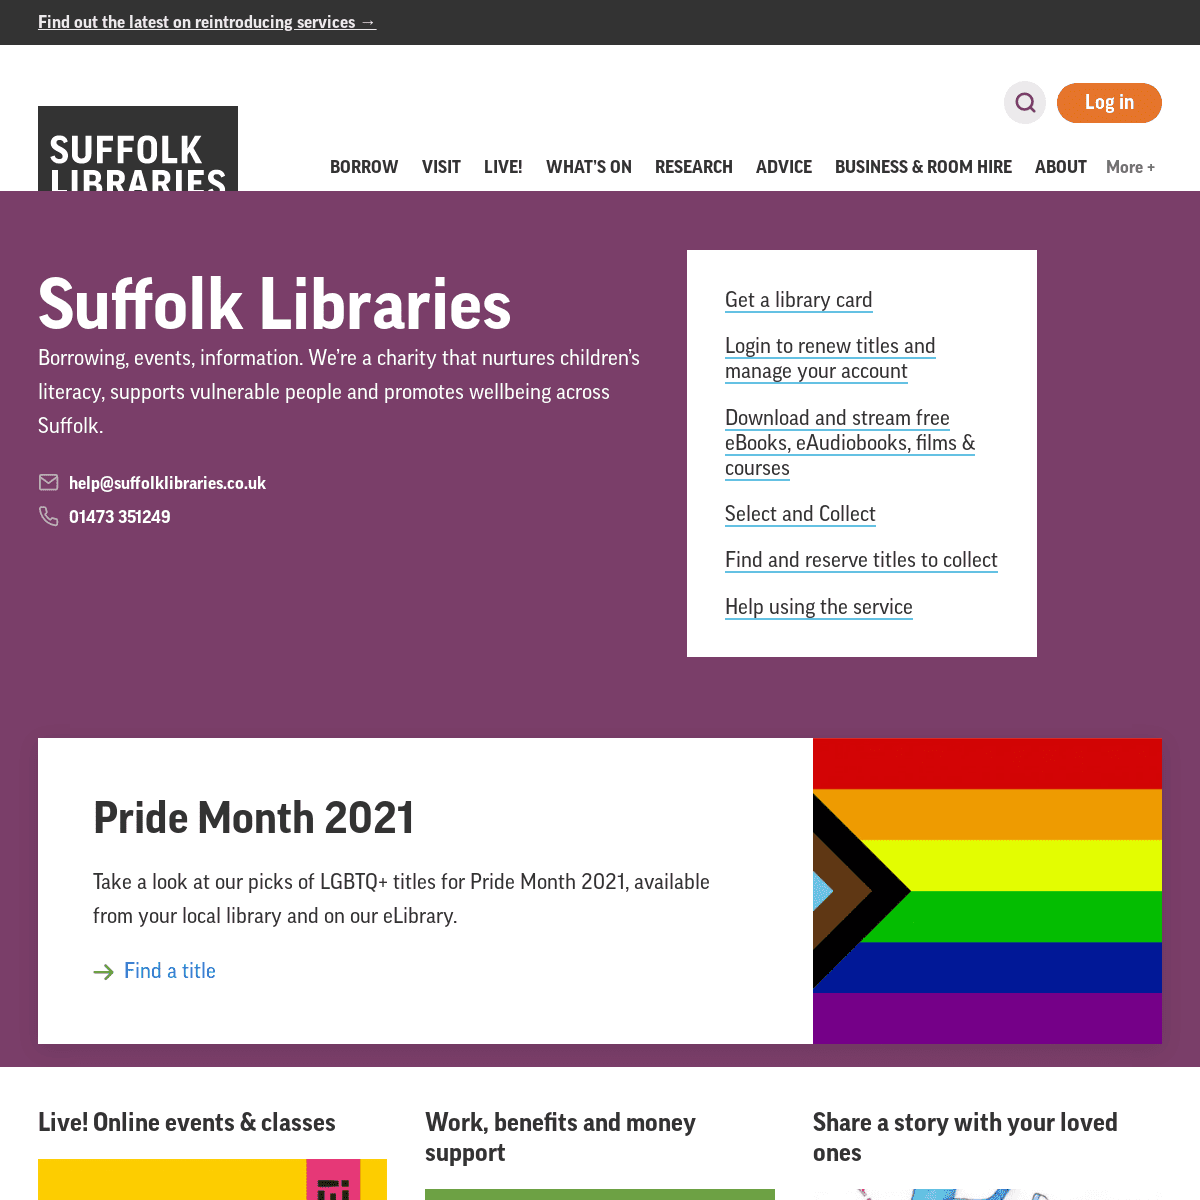 A complete backup of https://suffolklibraries.co.uk